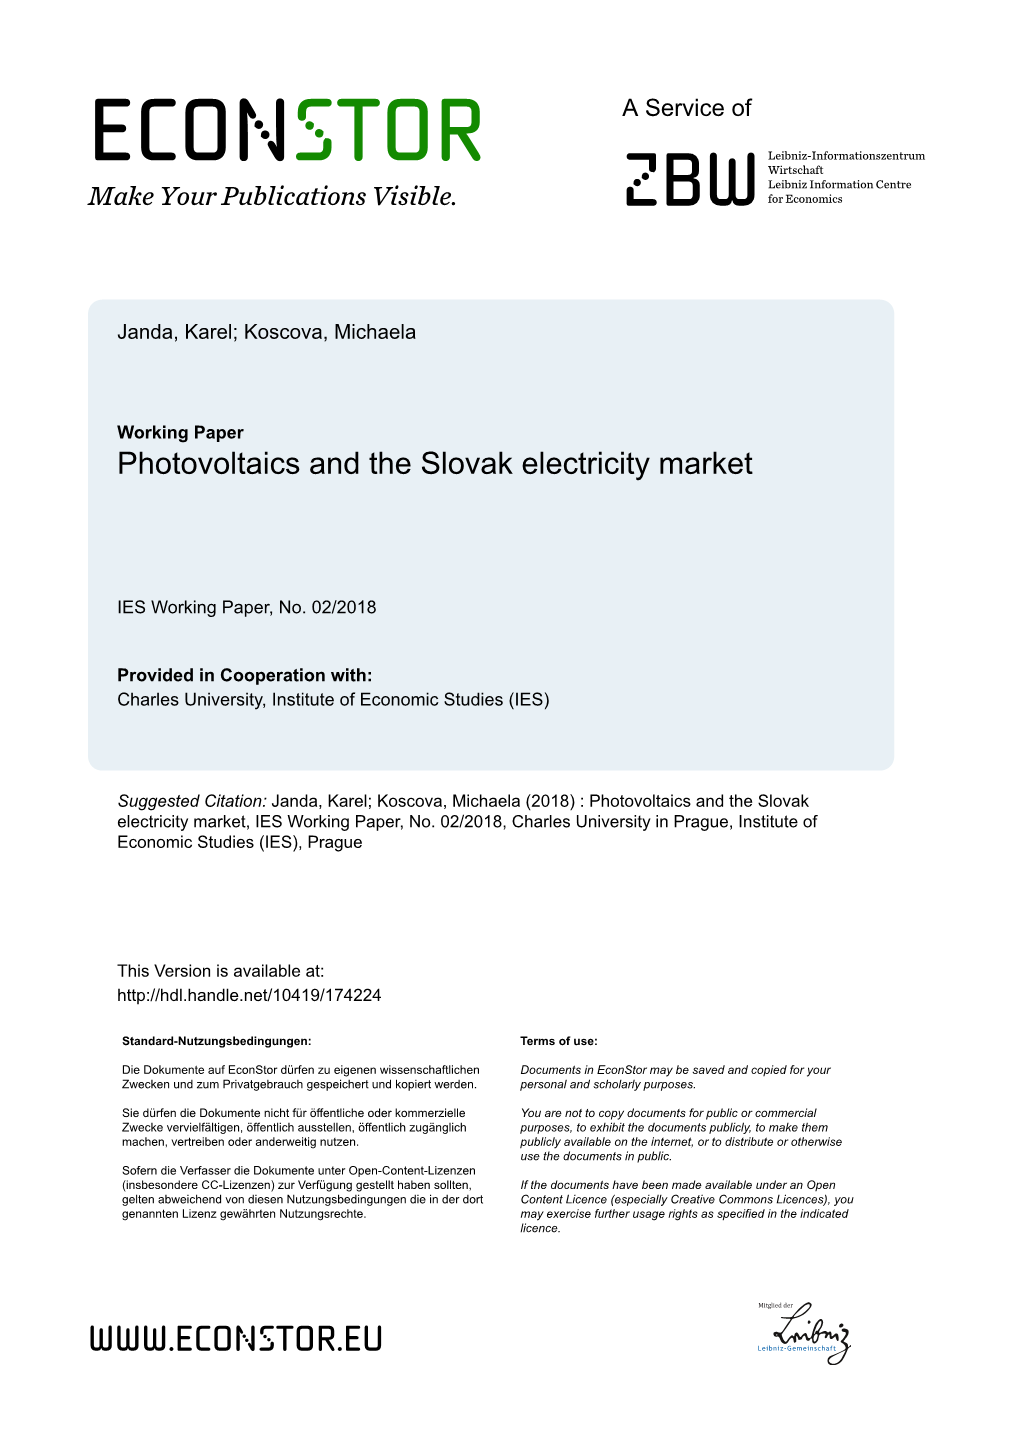 Photovoltaics and the Slovak Electricity Market